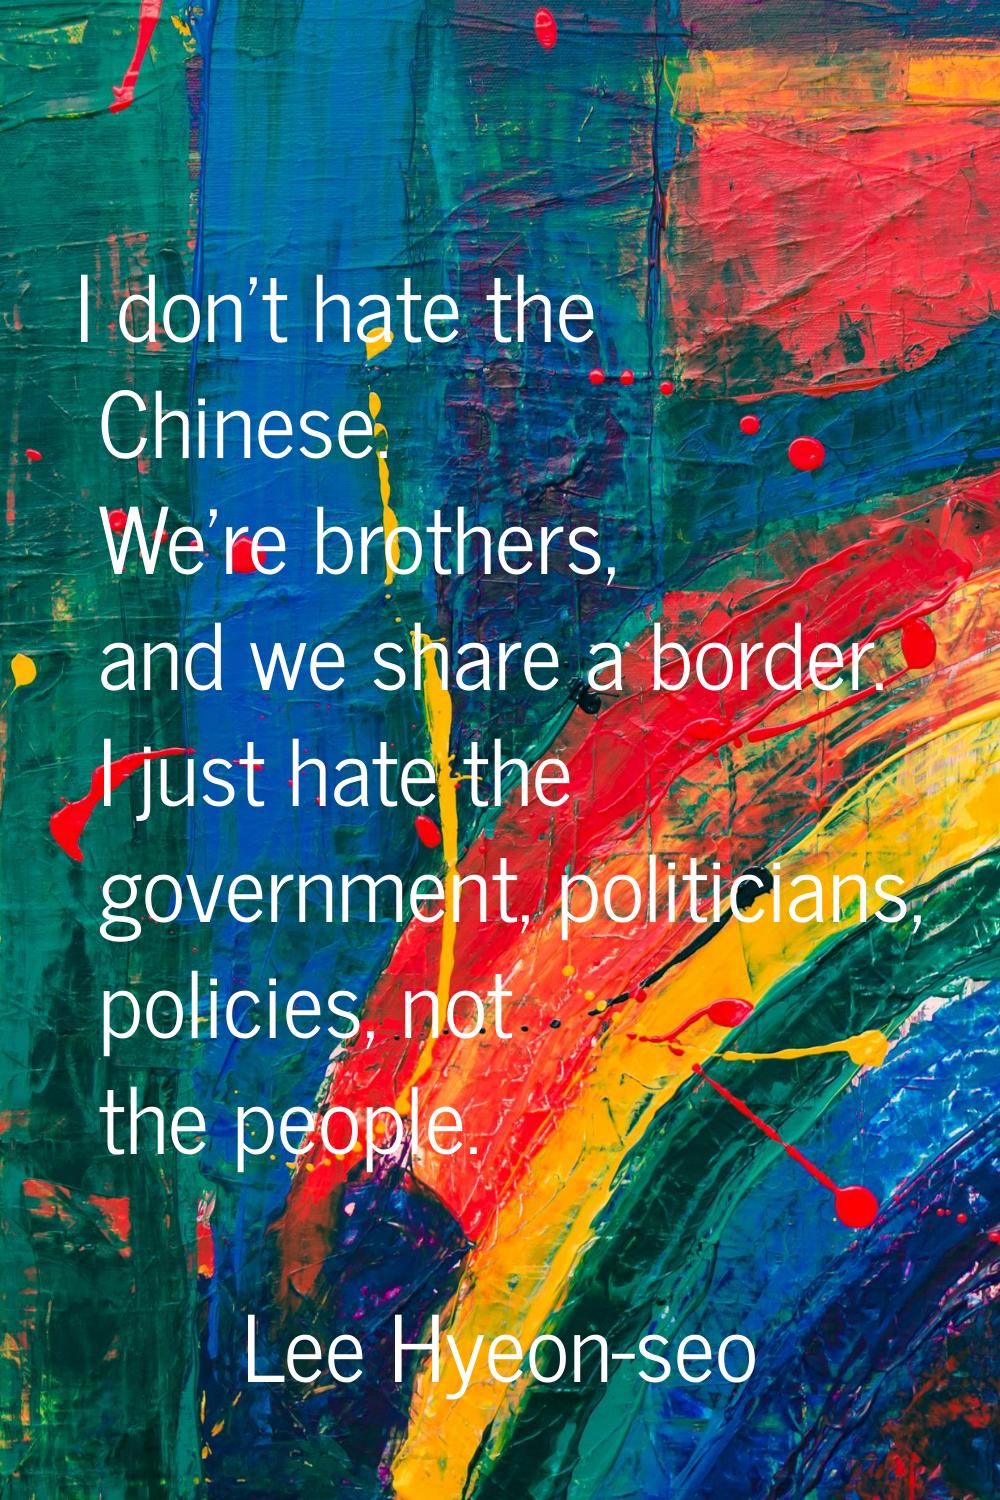 I don't hate the Chinese. We're brothers, and we share a border. I just hate the government, politi